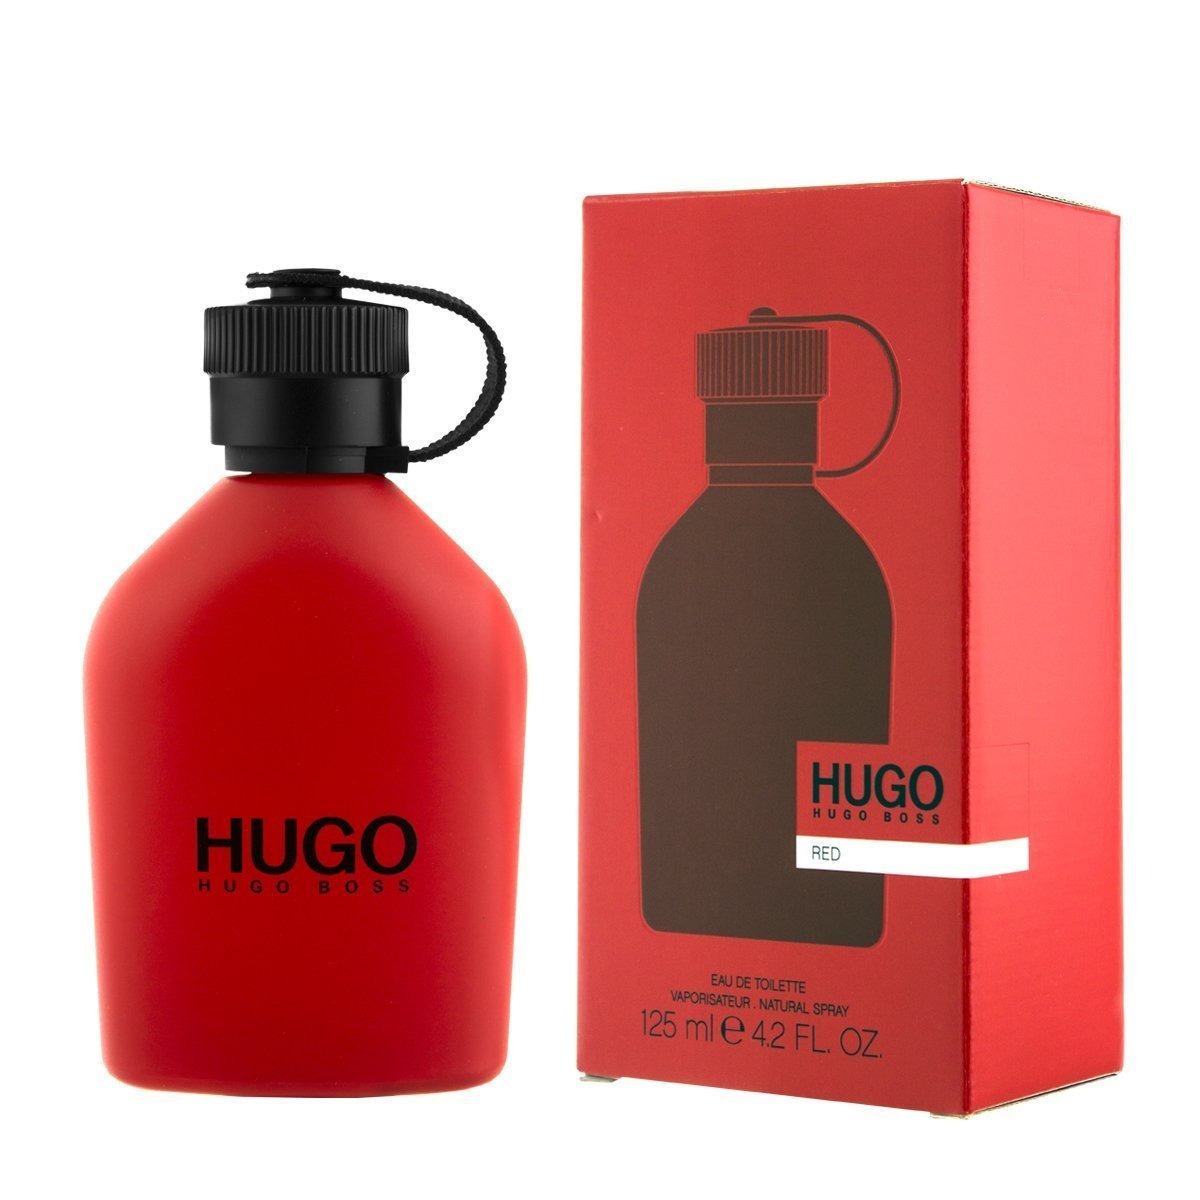 hugo boss red 100ml Cheaper Than Retail Price\u003e Buy Clothing, Accessories  and lifestyle products for women \u0026 men -